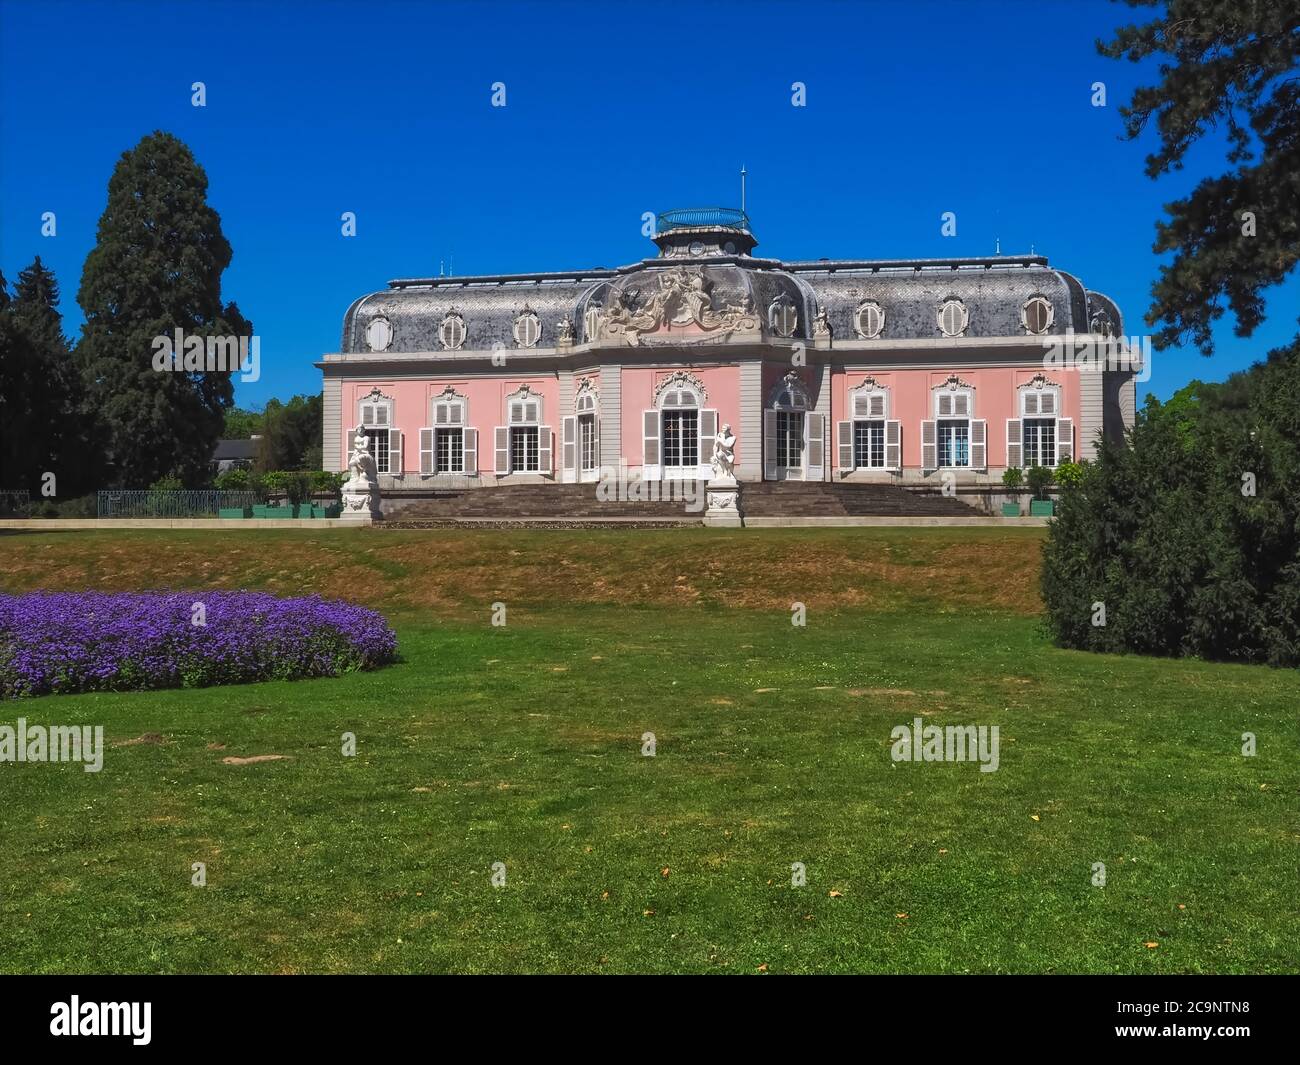 Romantic pink castle in Duesseldorf Schloss Benrath with a beautiful park and impressive sculptures Stock Photo